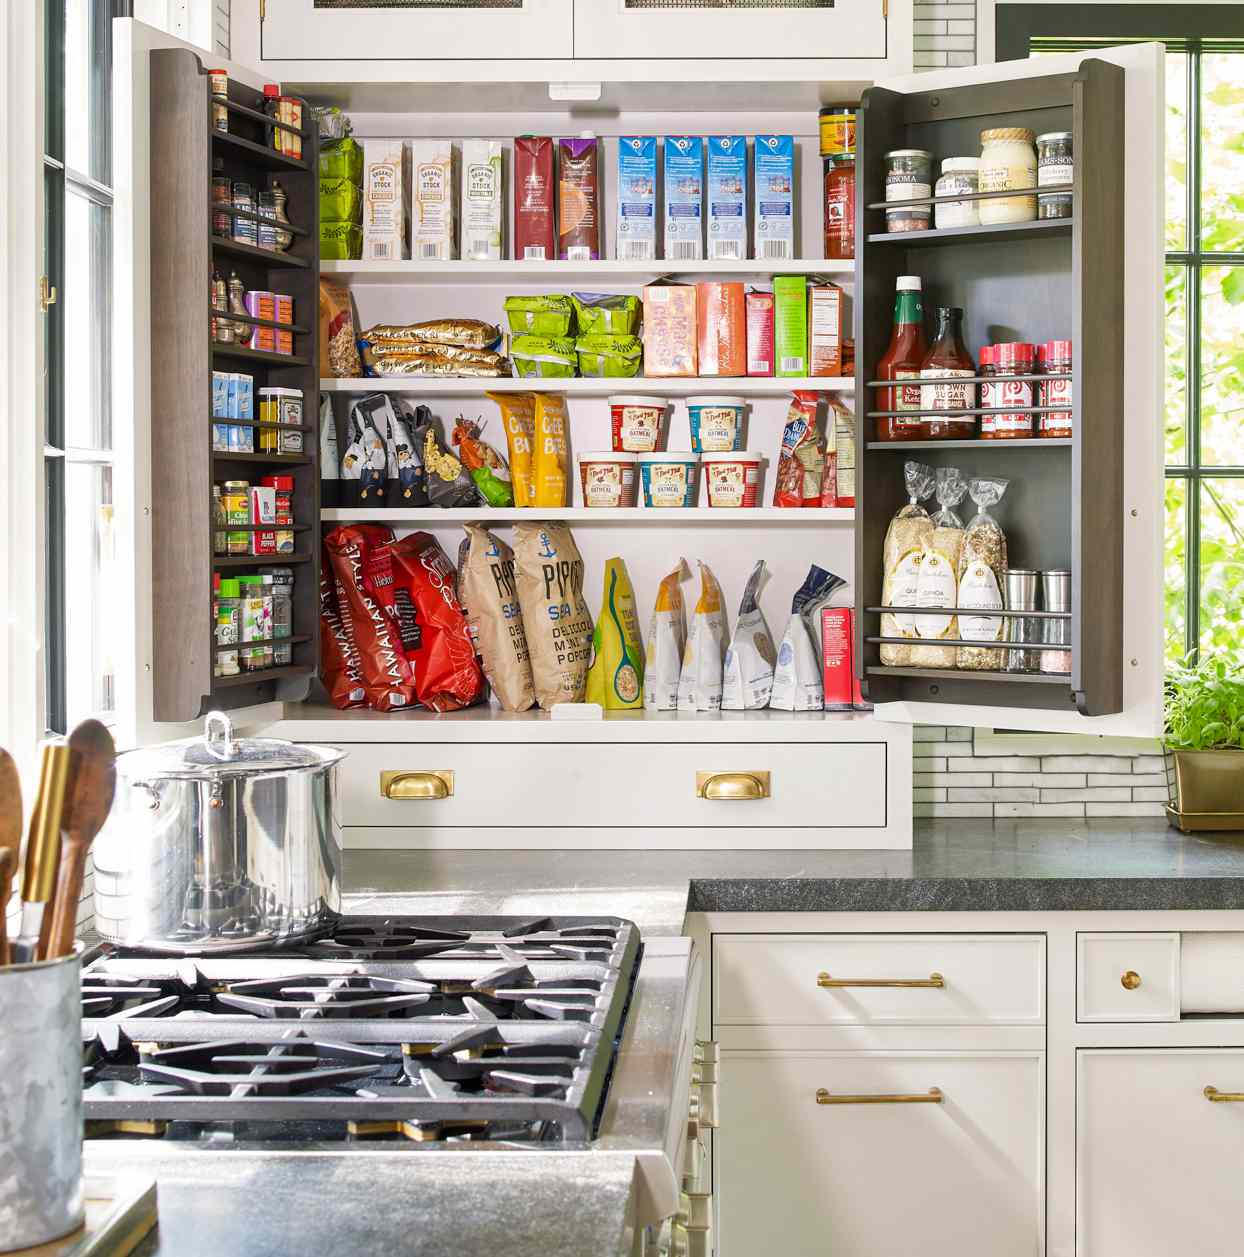 Organizing Kitchen Cabinets, How To Organize A Kitchen Without Cabinets